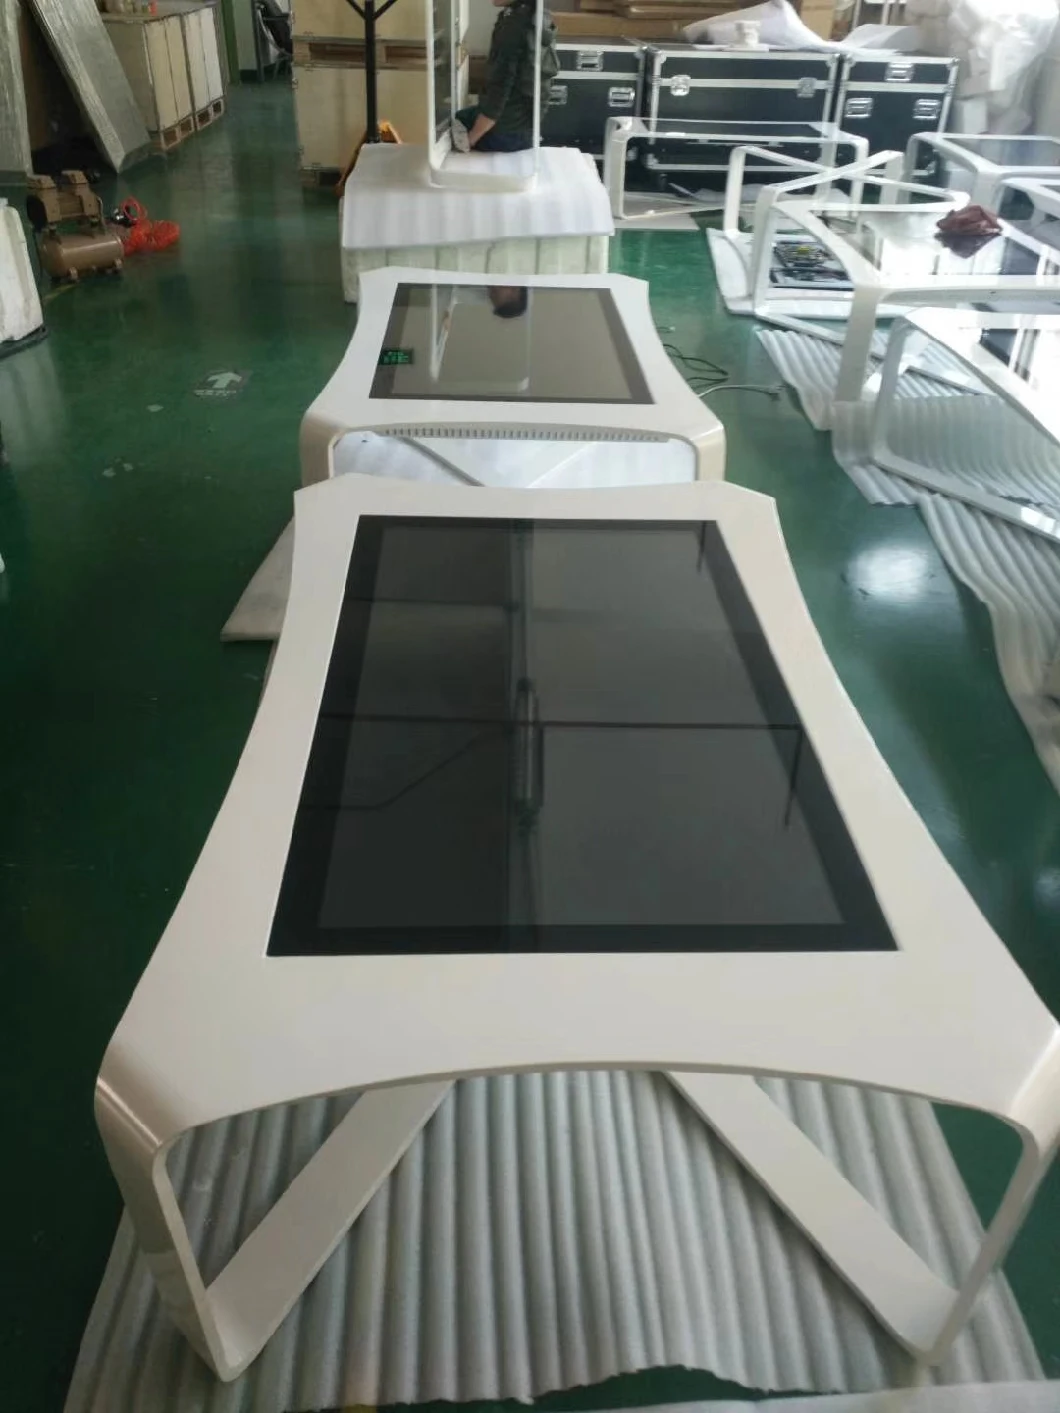 43'' 55'' Windows Interactive Smart Touch Table for Coffee / Restaurant